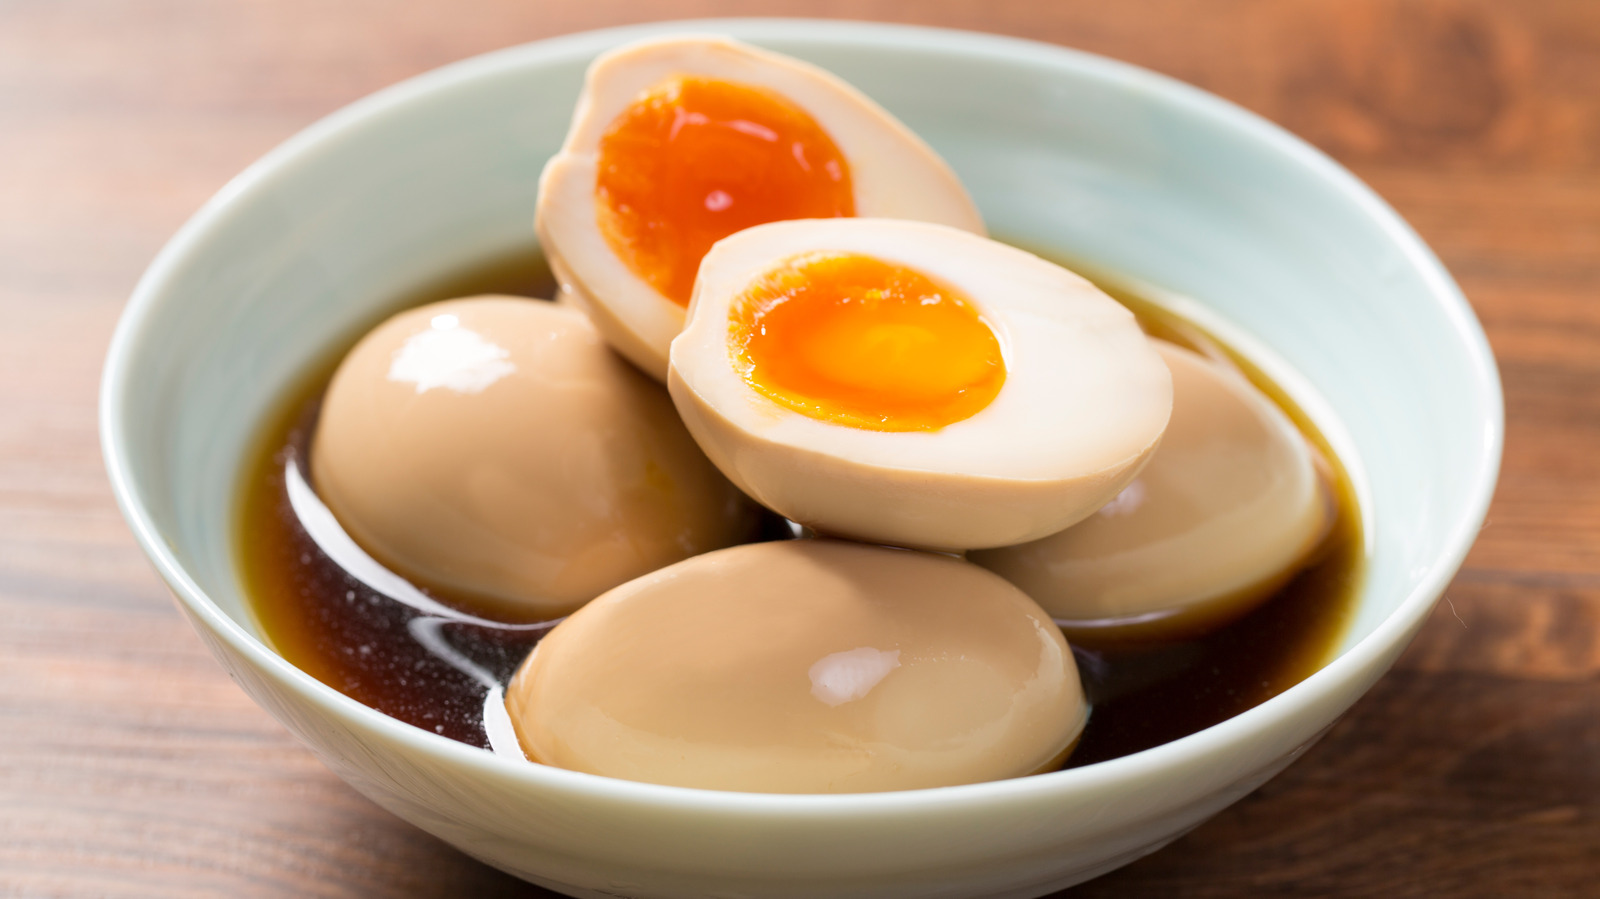 You Should Be Marinating Your Eggs In Soy Sauce. Here's Why